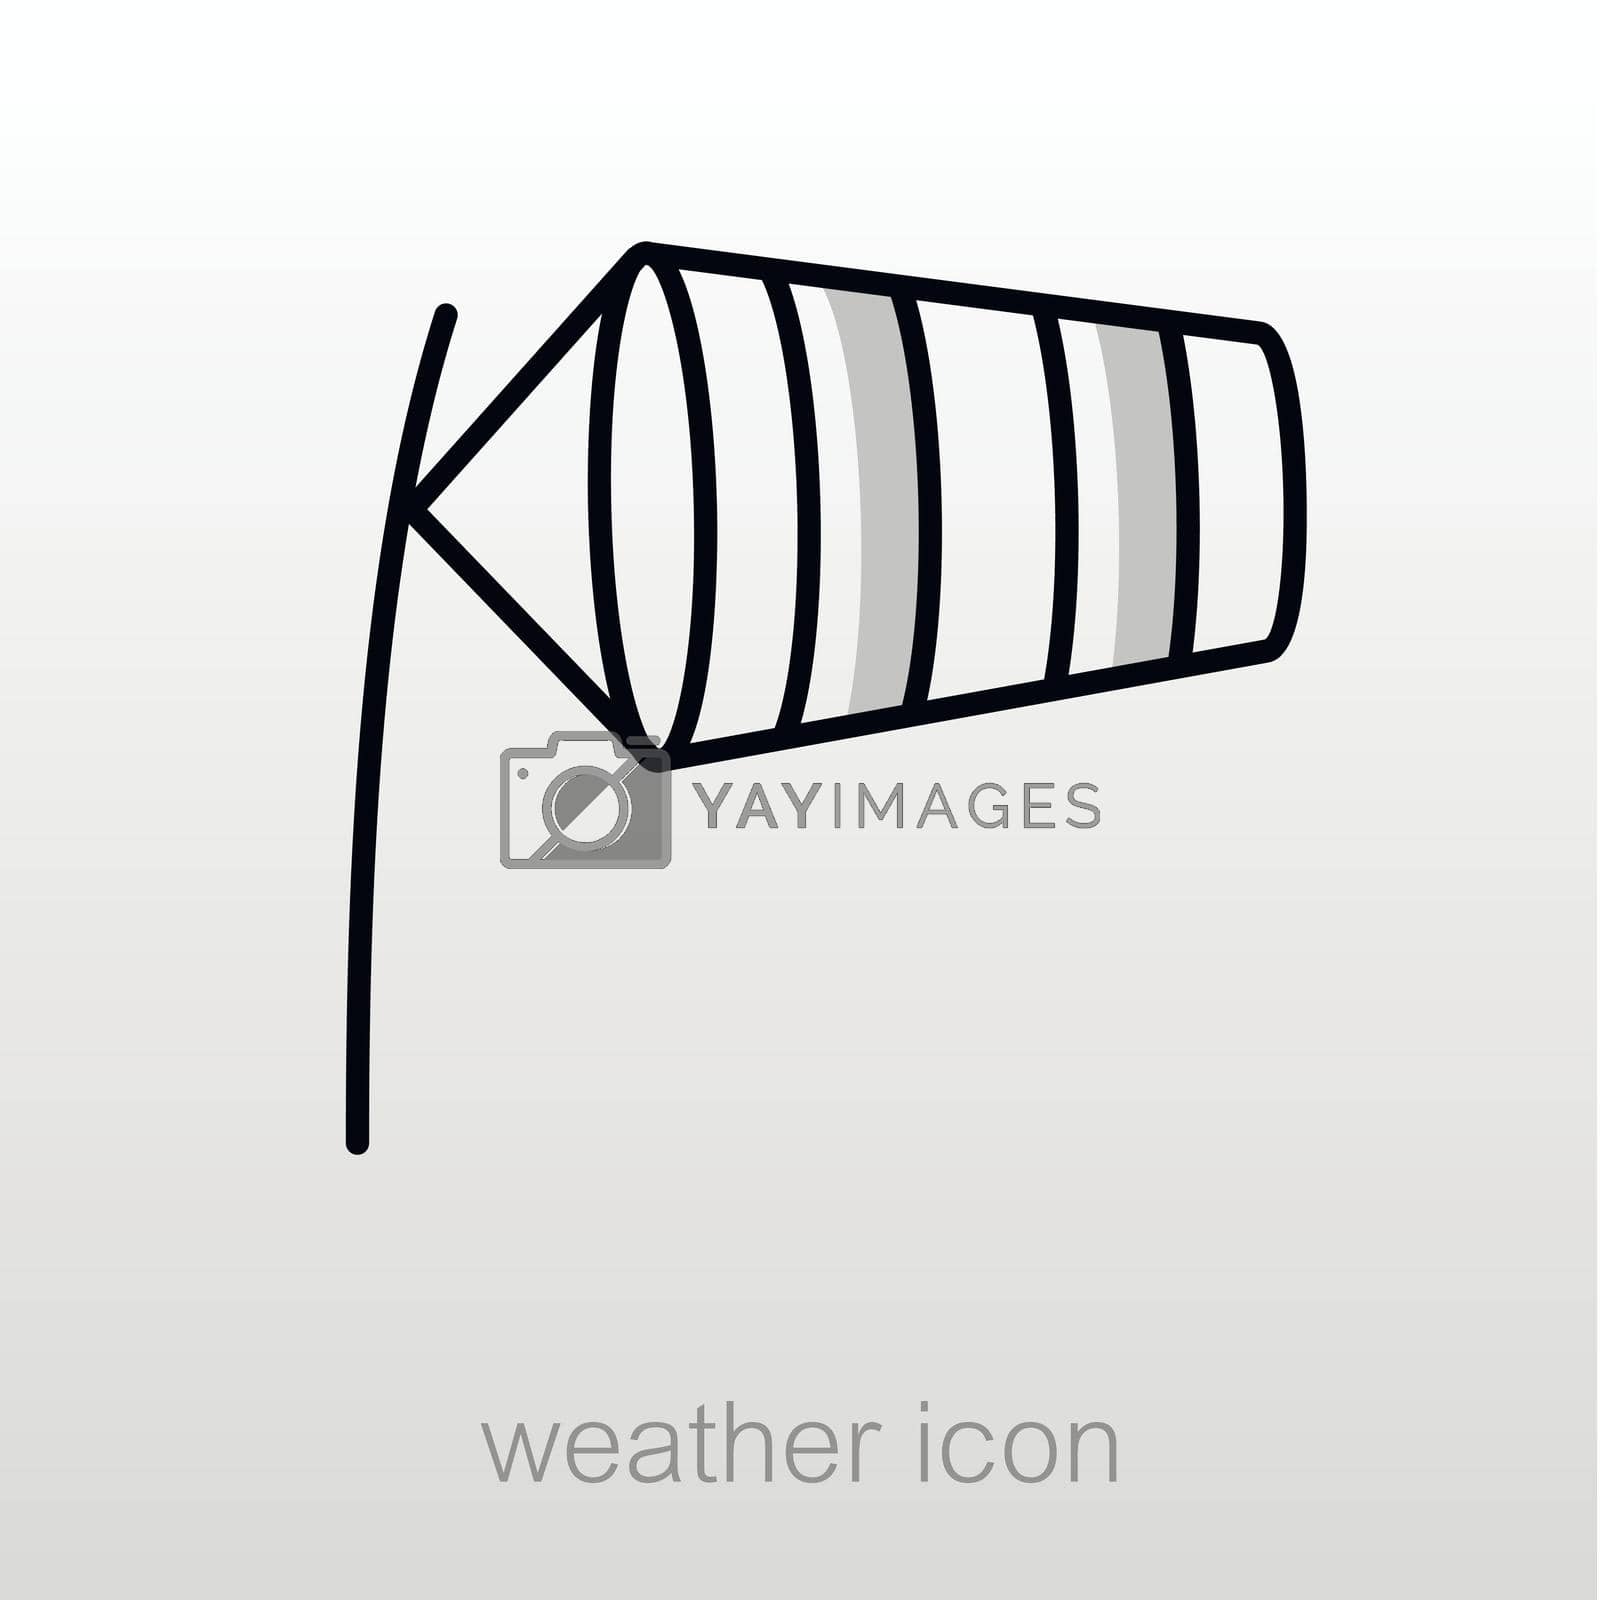 Windsocks inflated by wind at the airport runway. Meteorology. Weather. Vector illustration eps 10